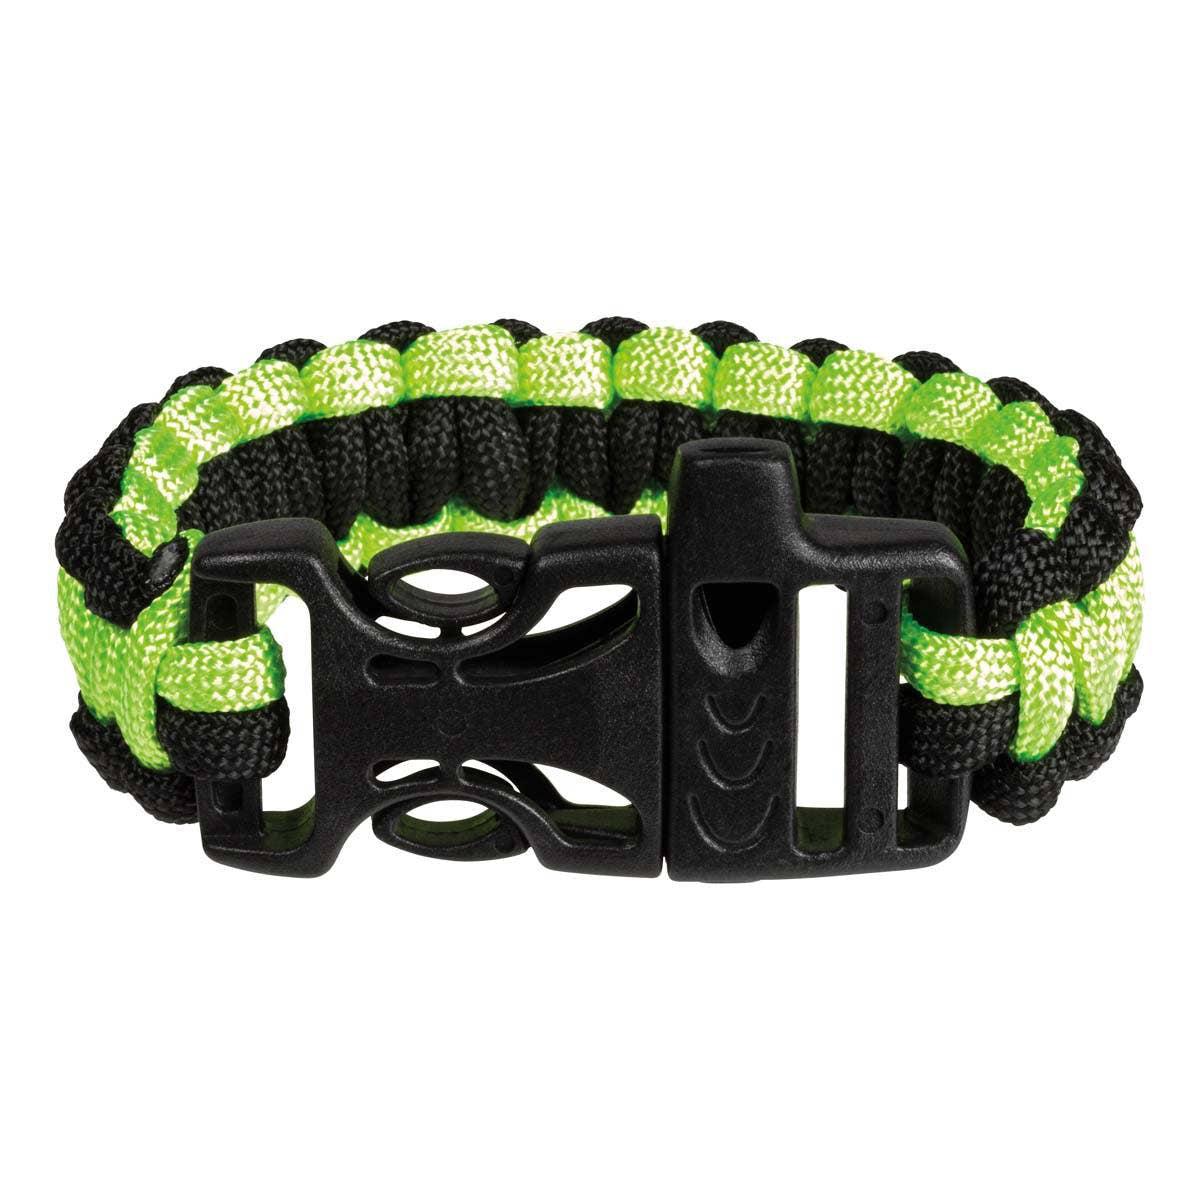 Outdoor Discovery Survival Bracelet With Whistle-Gear & Apparel-Yellow Springs Toy Company